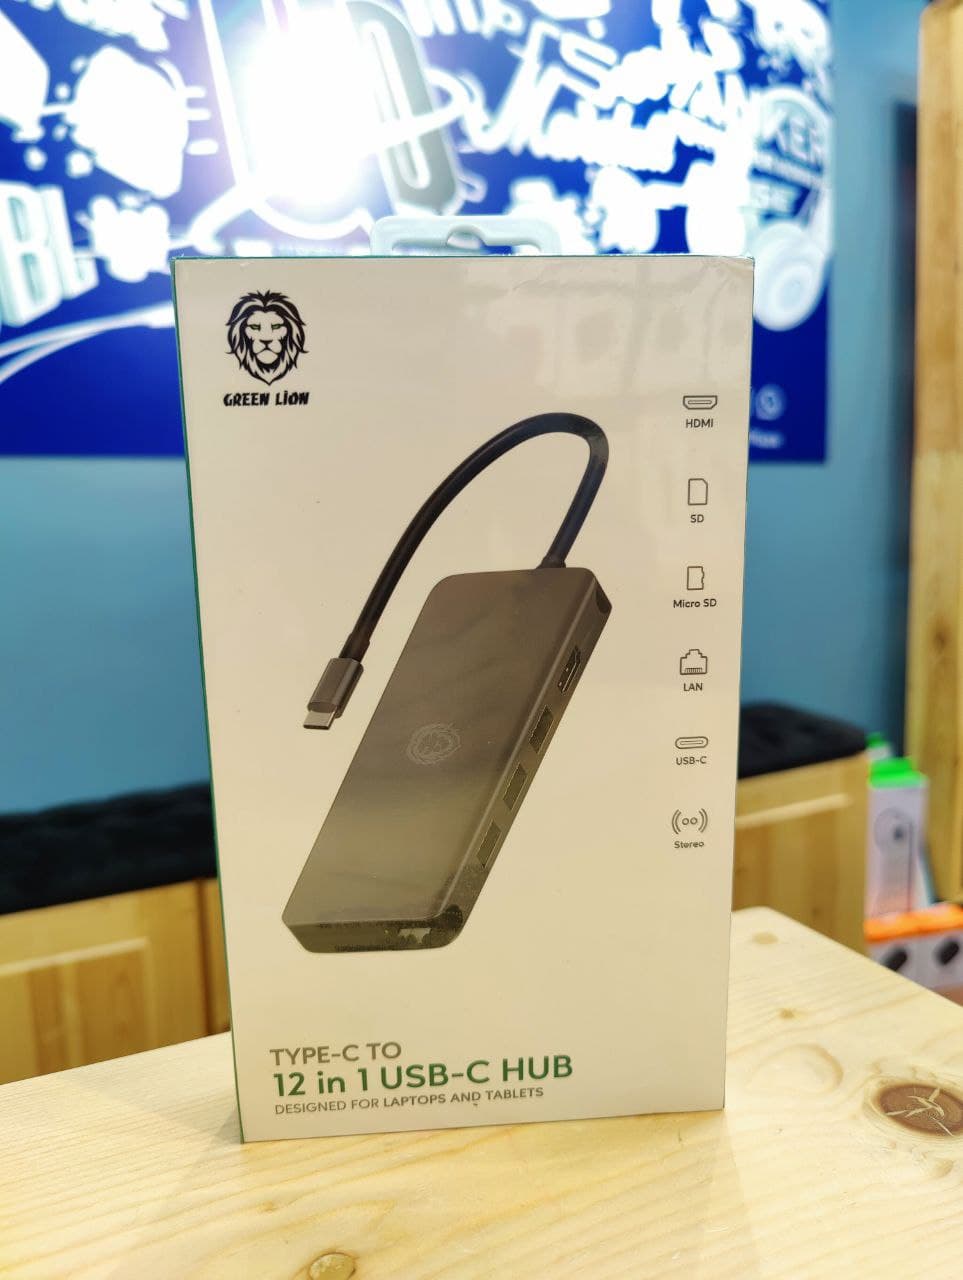 Green Lion Type C To 12 In 1 USB-C Connection Hub